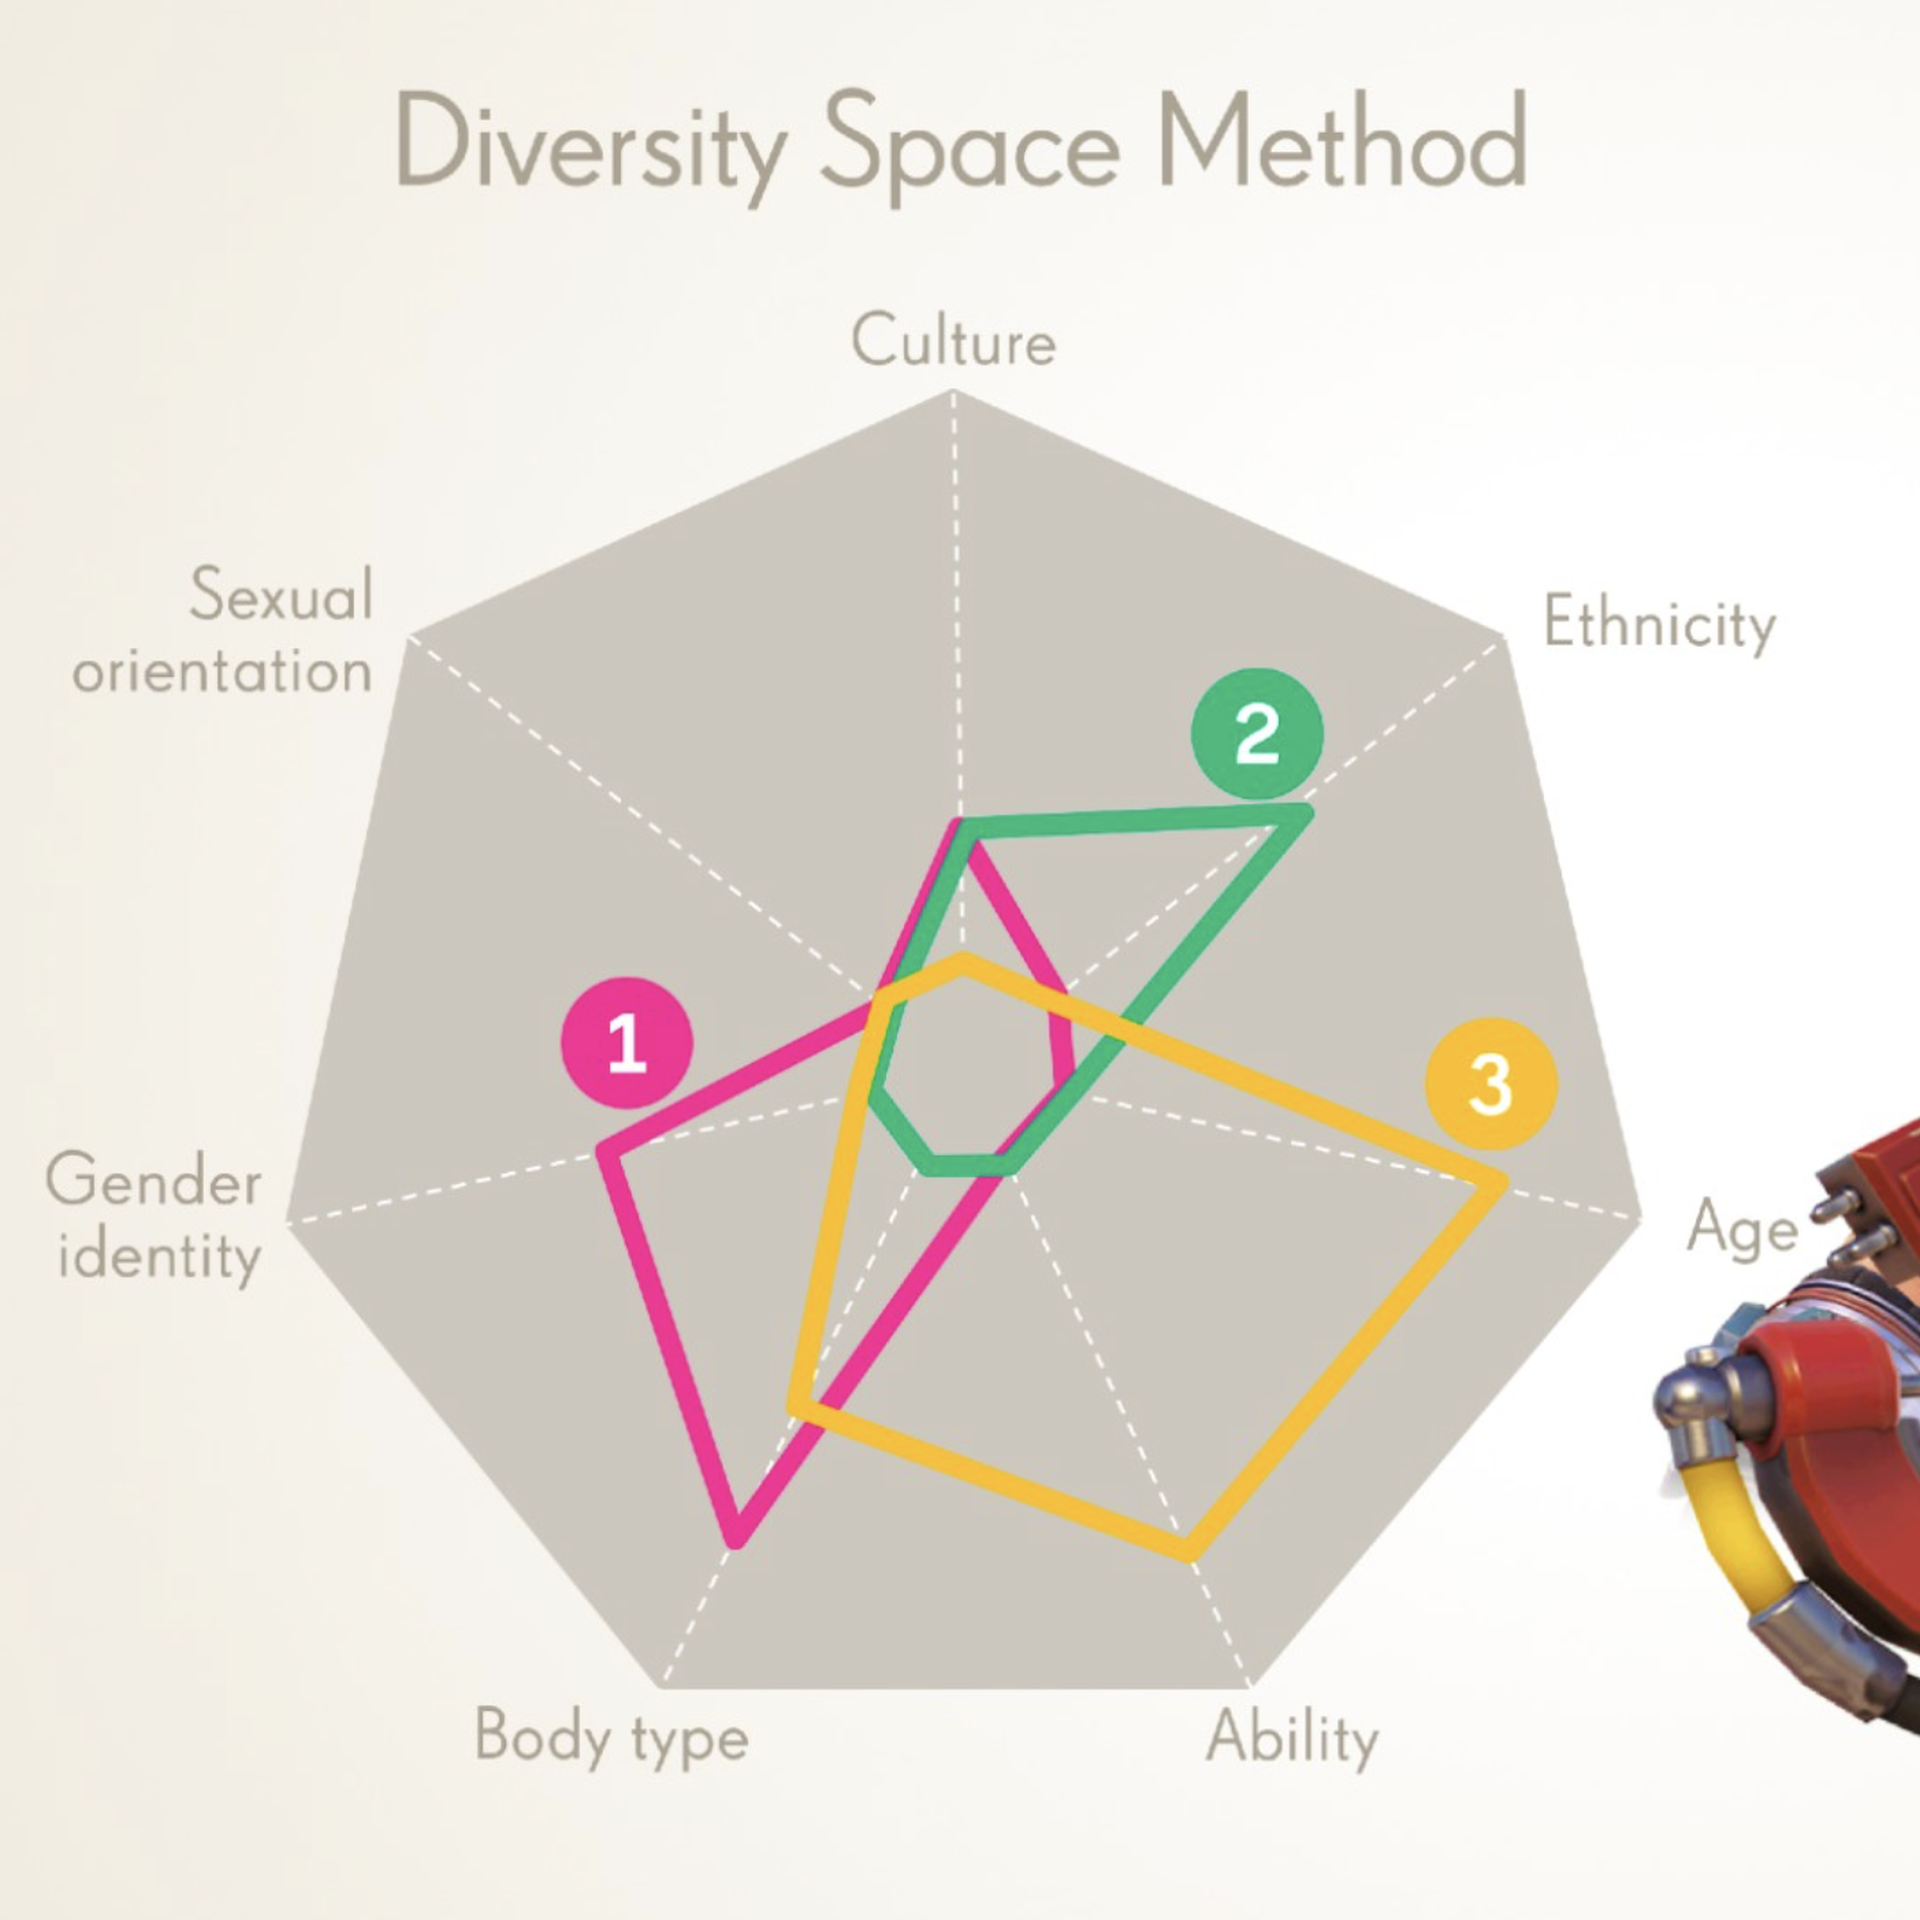 A composite image showing three characters from the game Overwatch next to a radar chart that shows how they rate in terms of culture, ethnicity and other traits